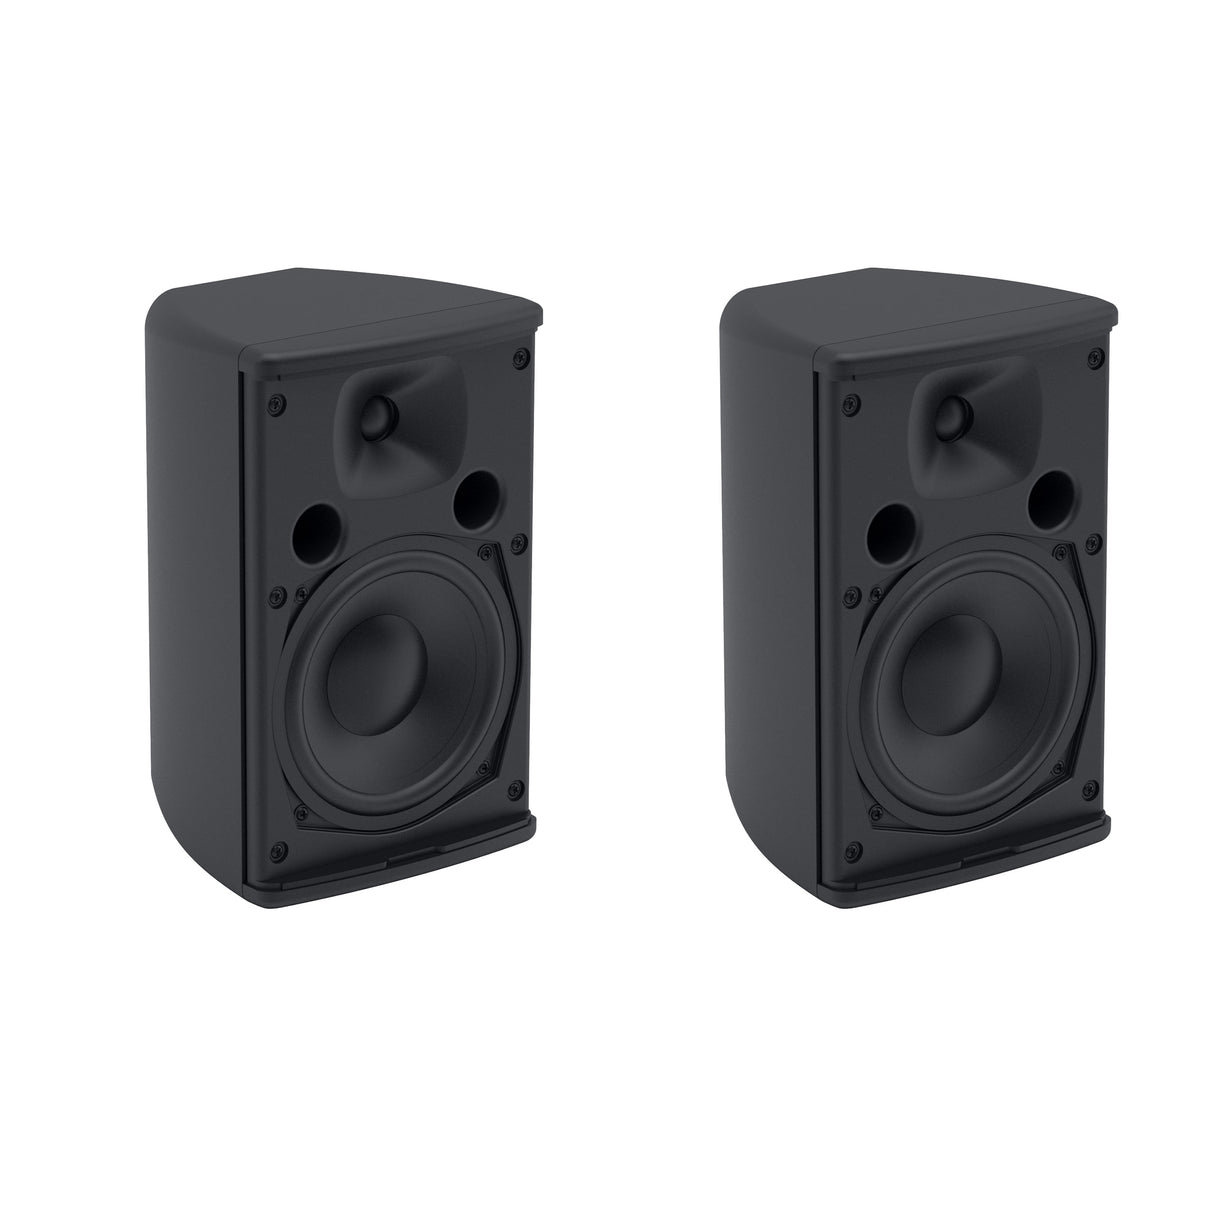 Martin Audio A55 ADORN 5.25-Inch Passive Two-Way On-Wall Loudspeaker, Black, Pair